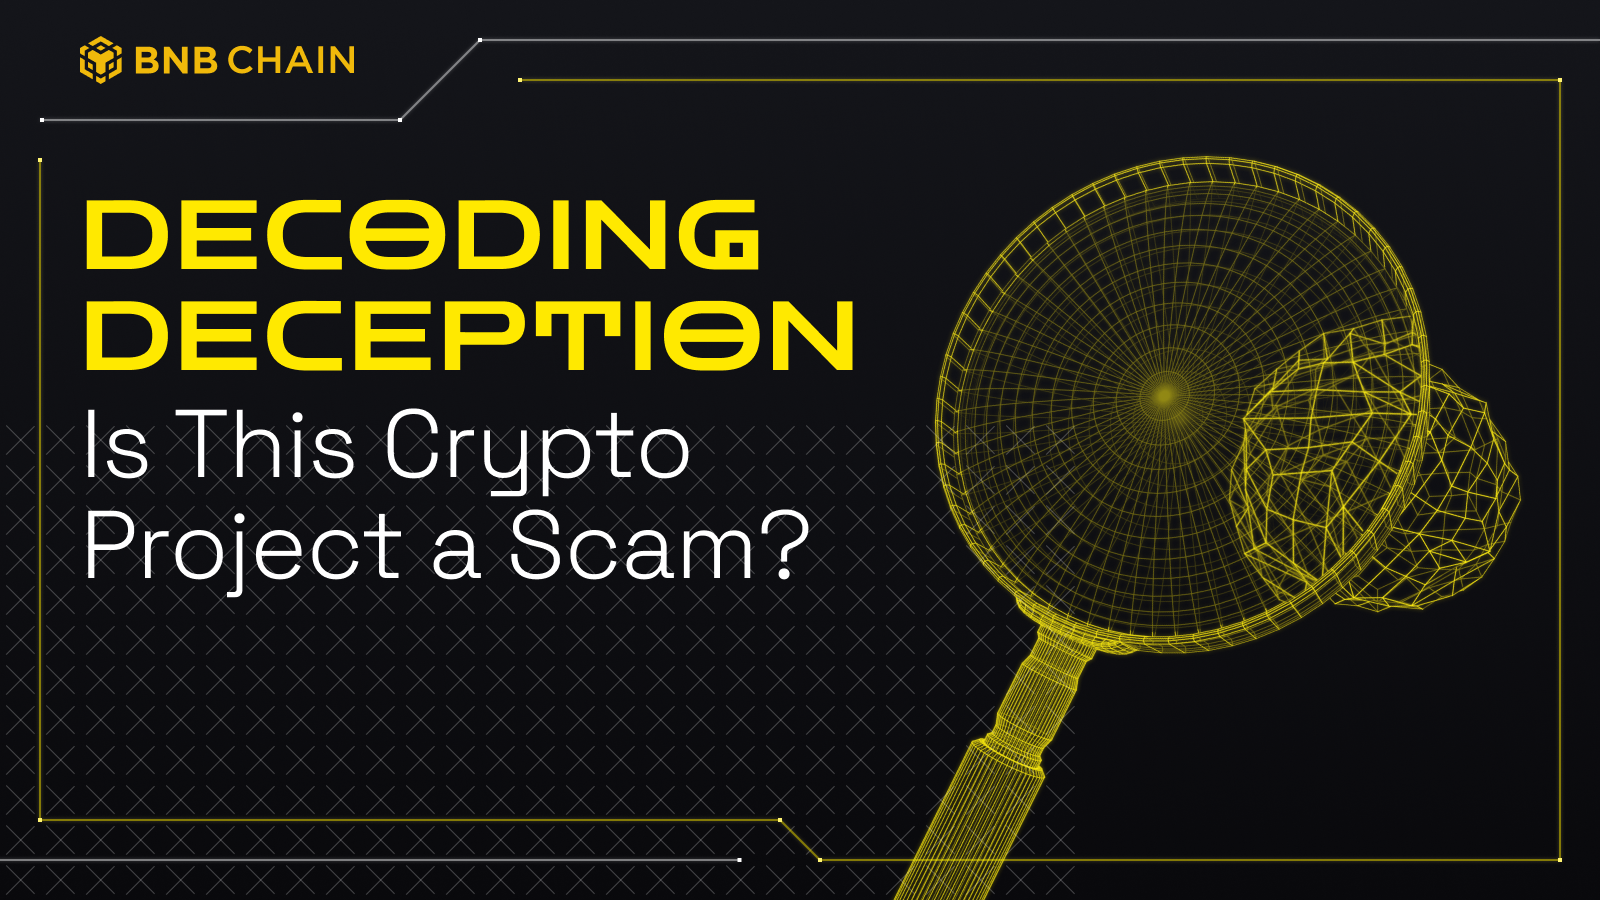 Decoding Deception: Is This Crypto Project a Scam?